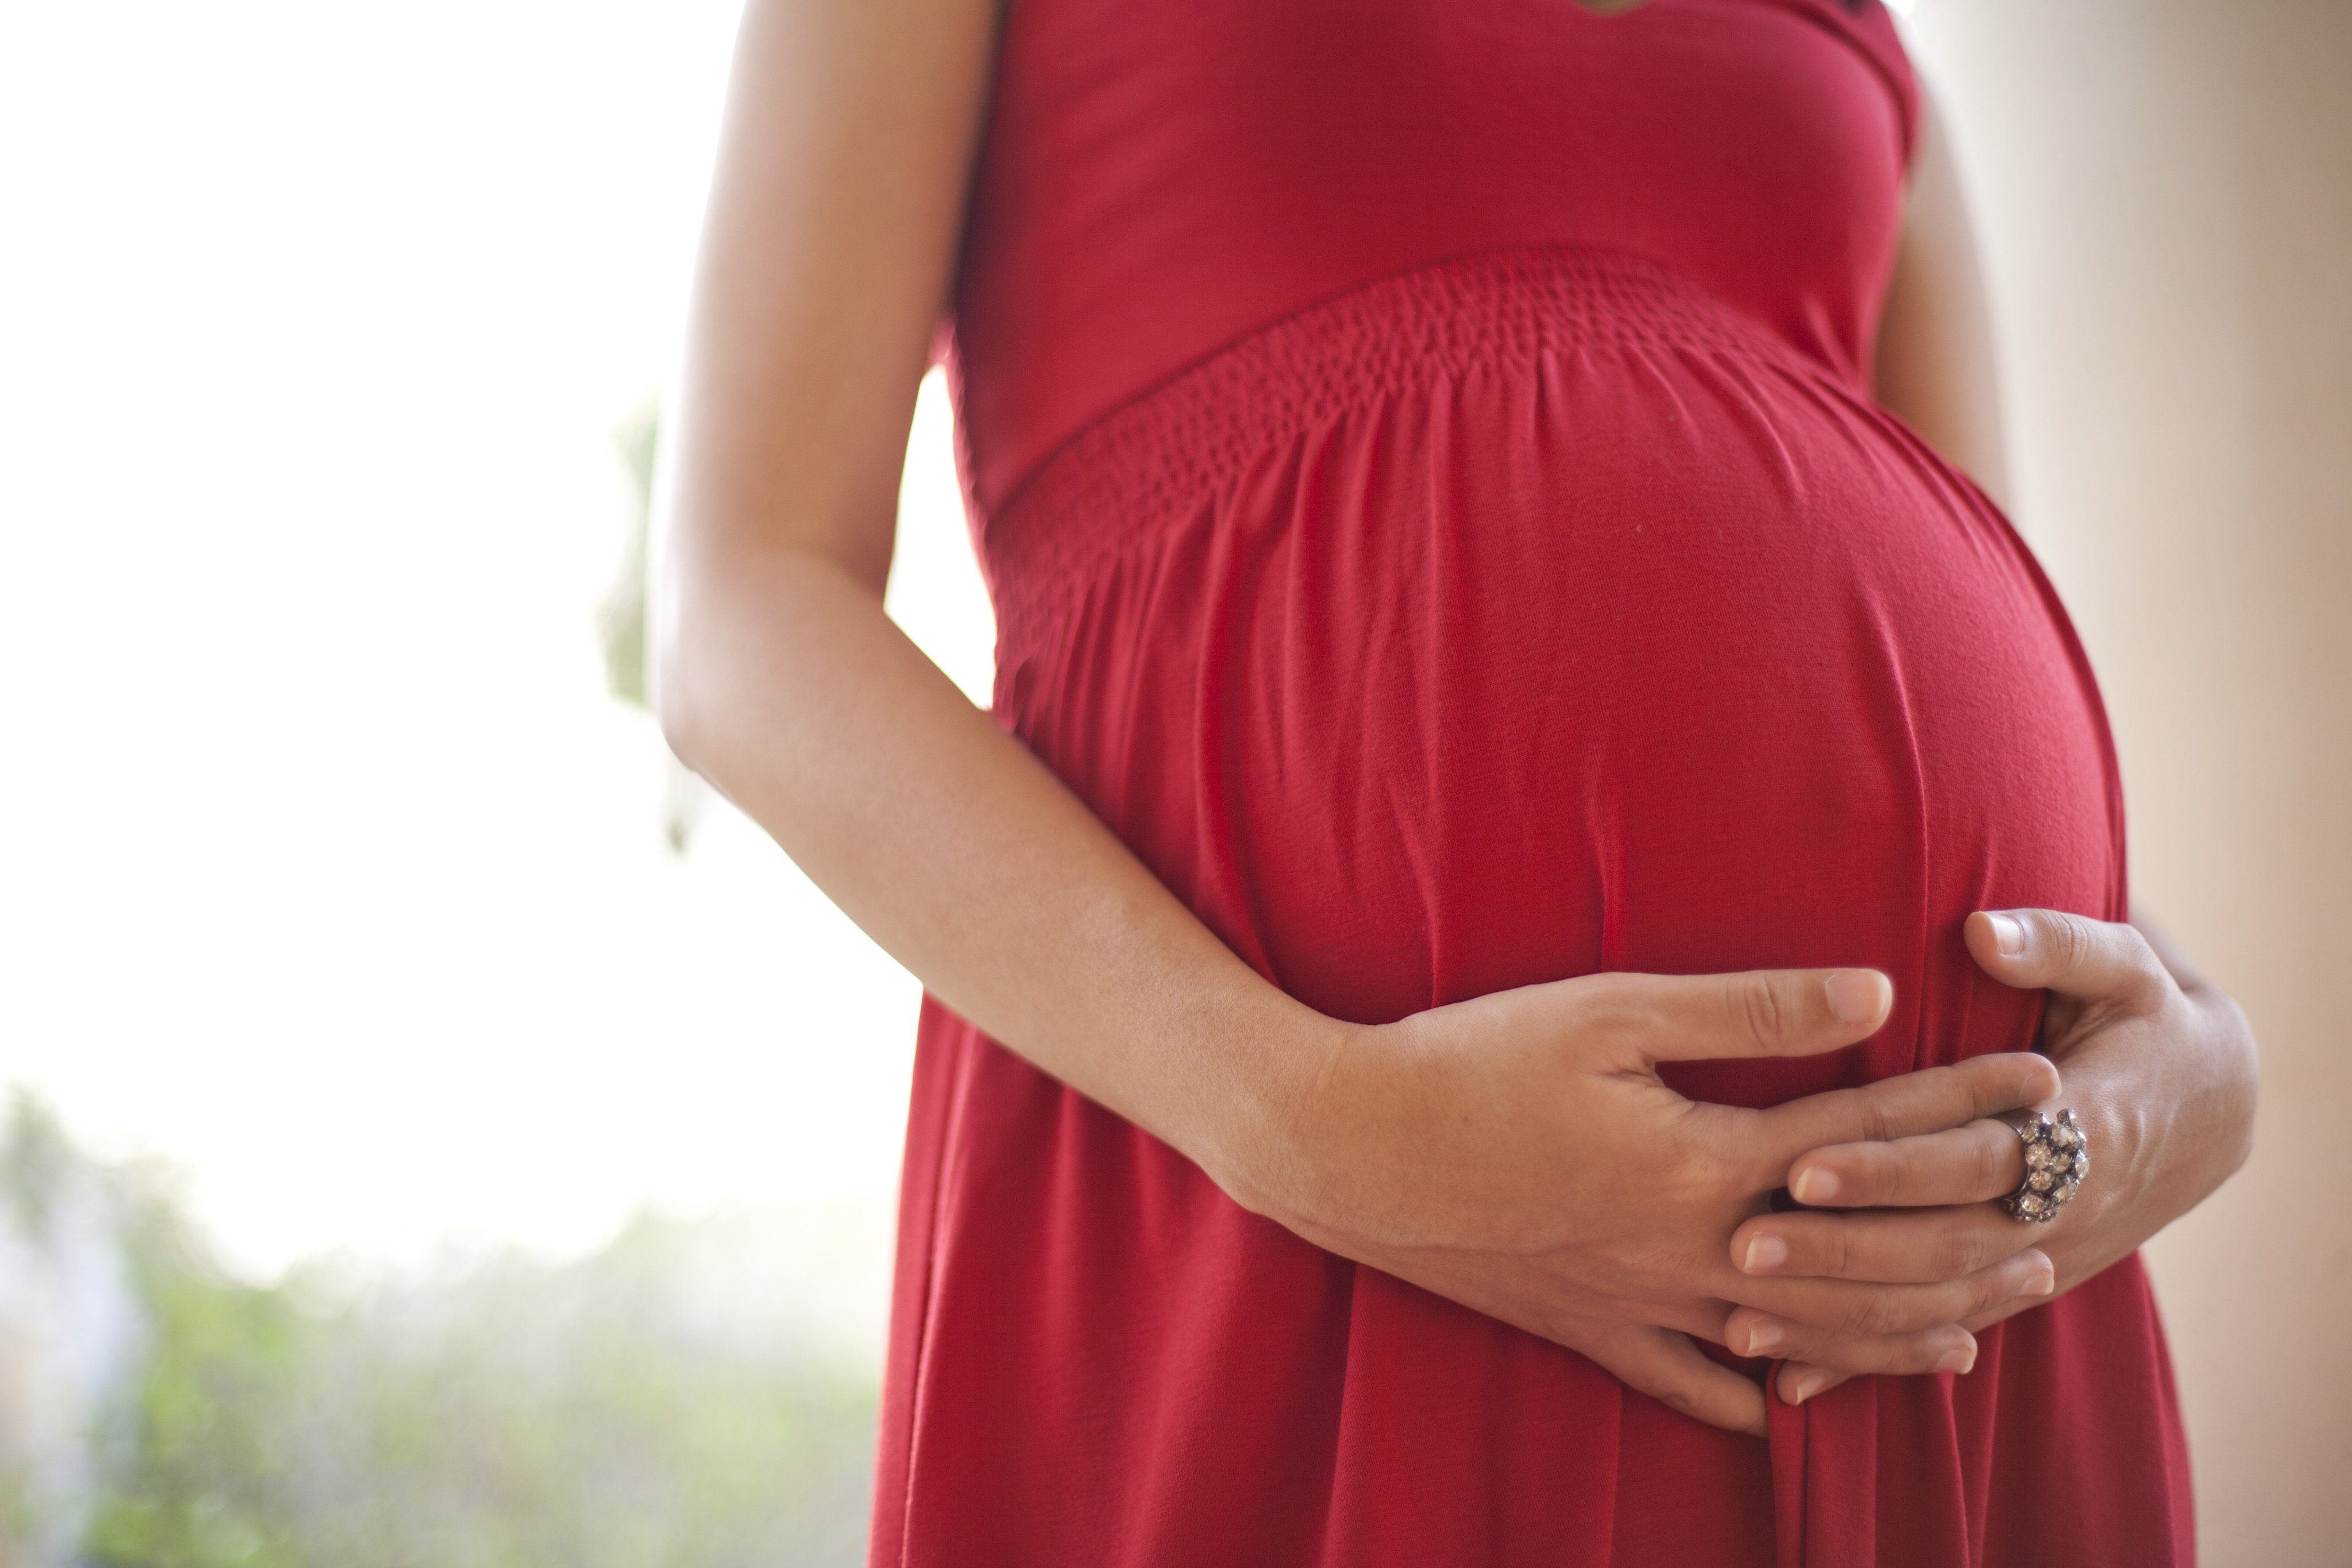 A proposed law in the Philippines aims to tackle the teen pregnancy emergency and is two steps away from a vote in the Senate. Photo: Shutterstock